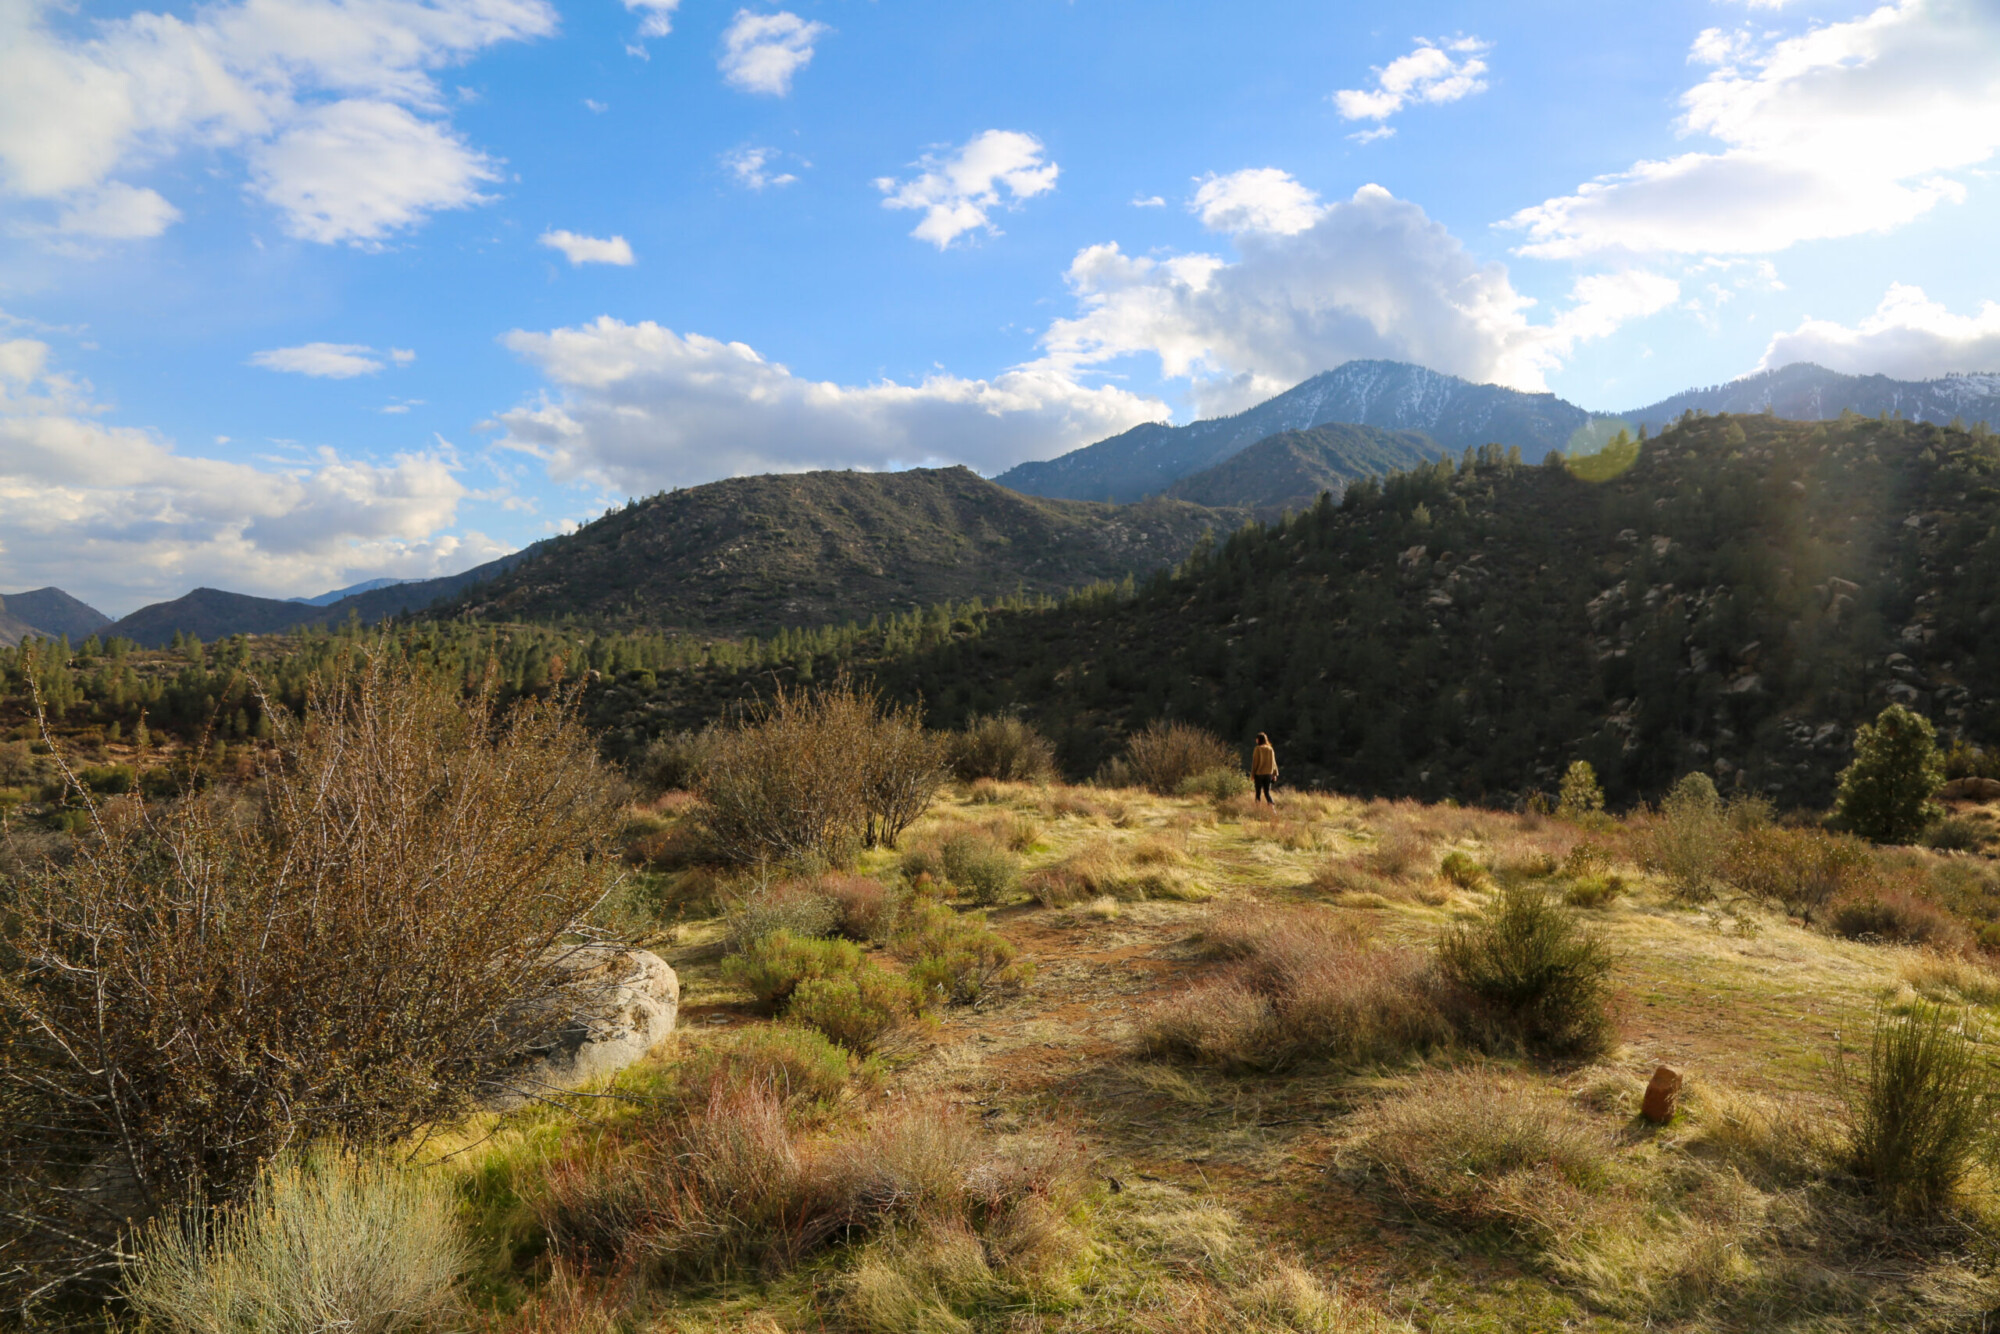 View of rural mountains from a hiking trail near Kernville, California.